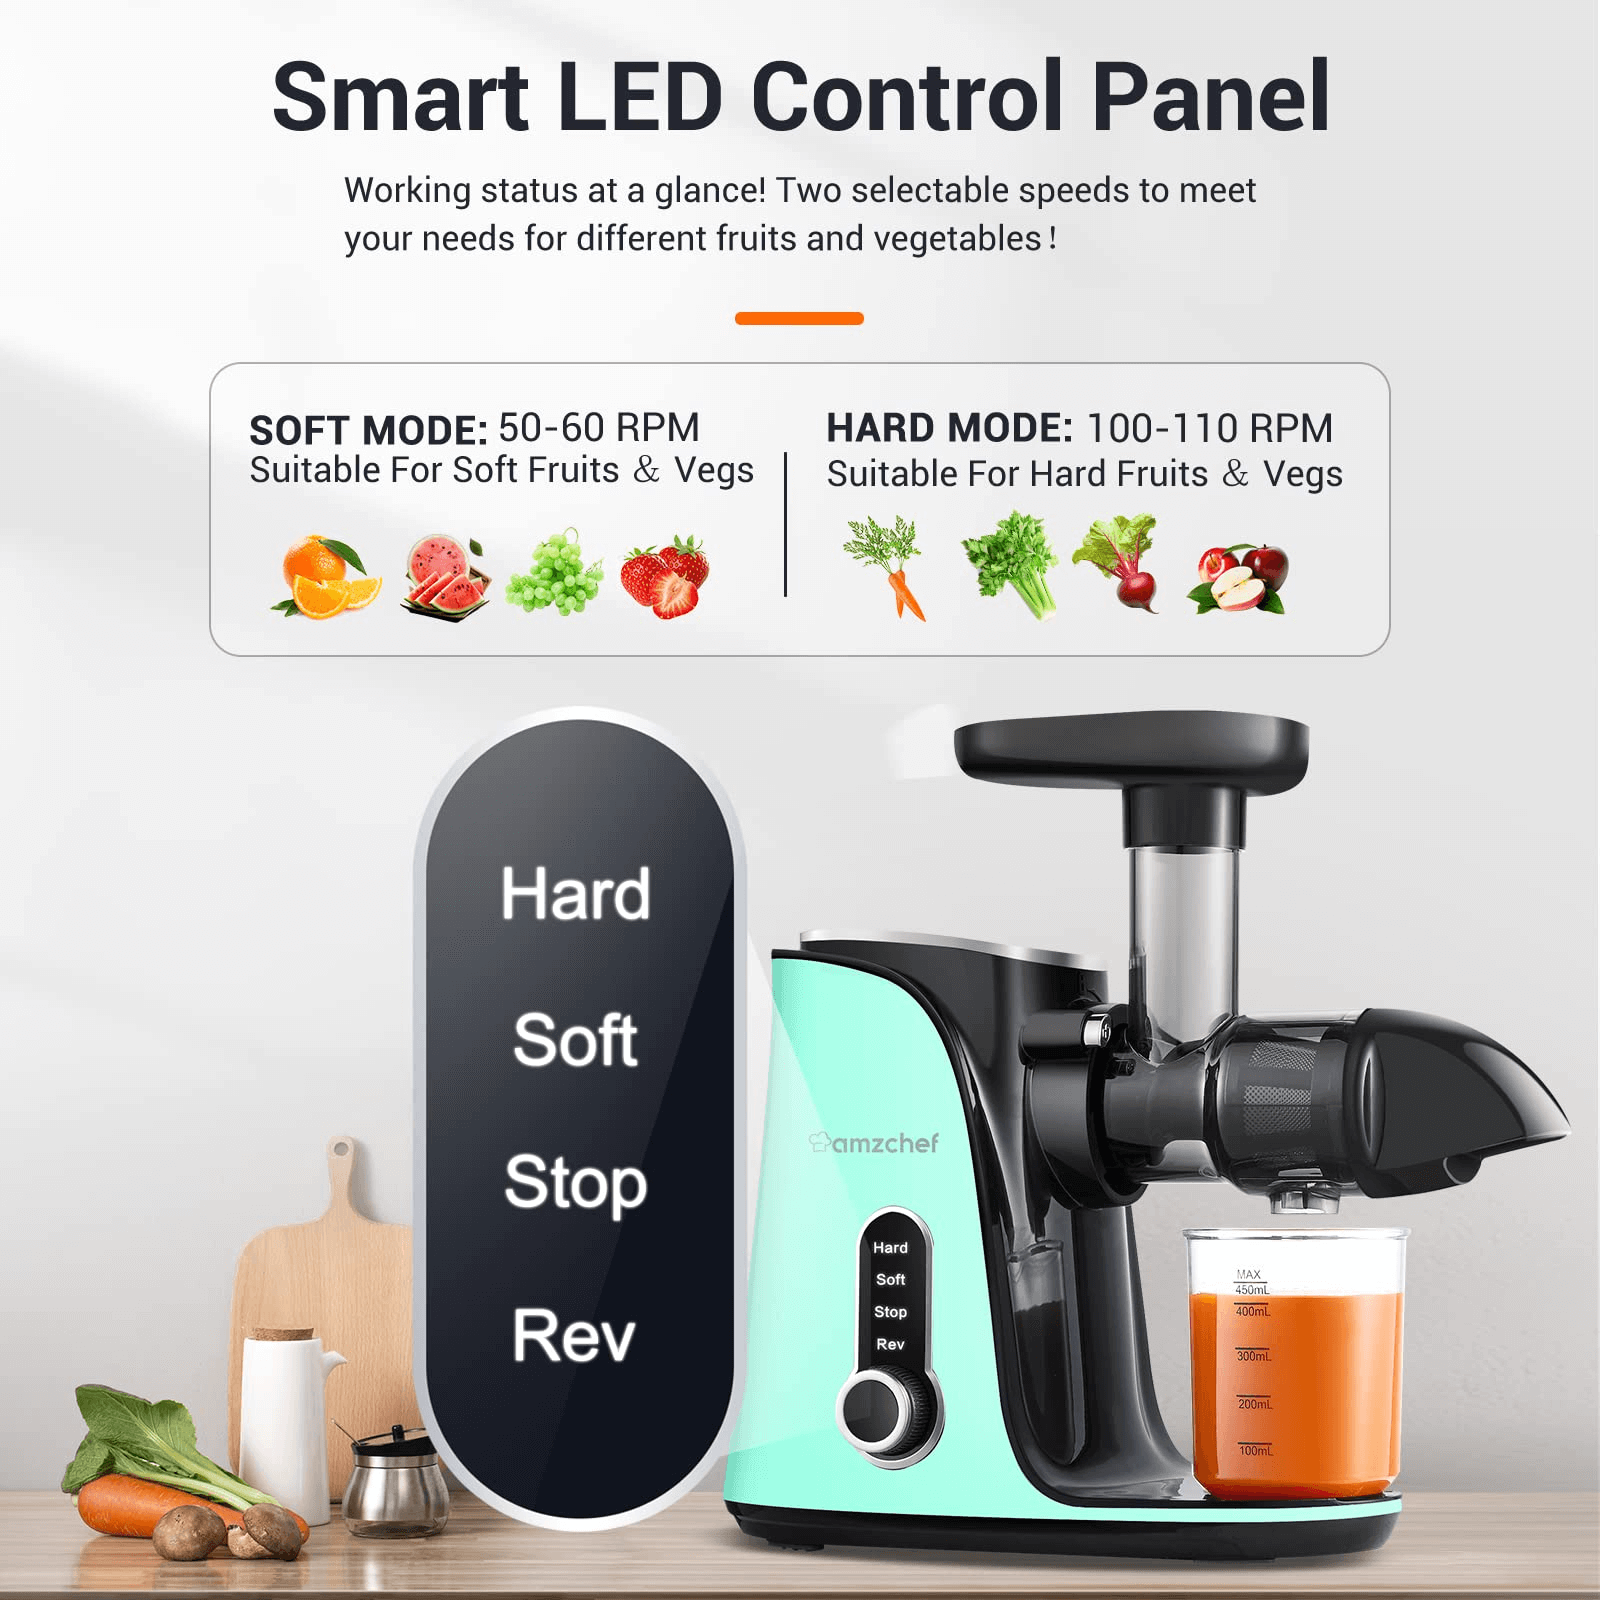 https://cdn.shopify.com/s/files/1/0592/2517/8292/products/AMZCHEF_Slow_Juicer_for_Fruit_and_Vegetables_Powerful_Juicer_GM3001_Green_2.png?v=1676601048&width=1600